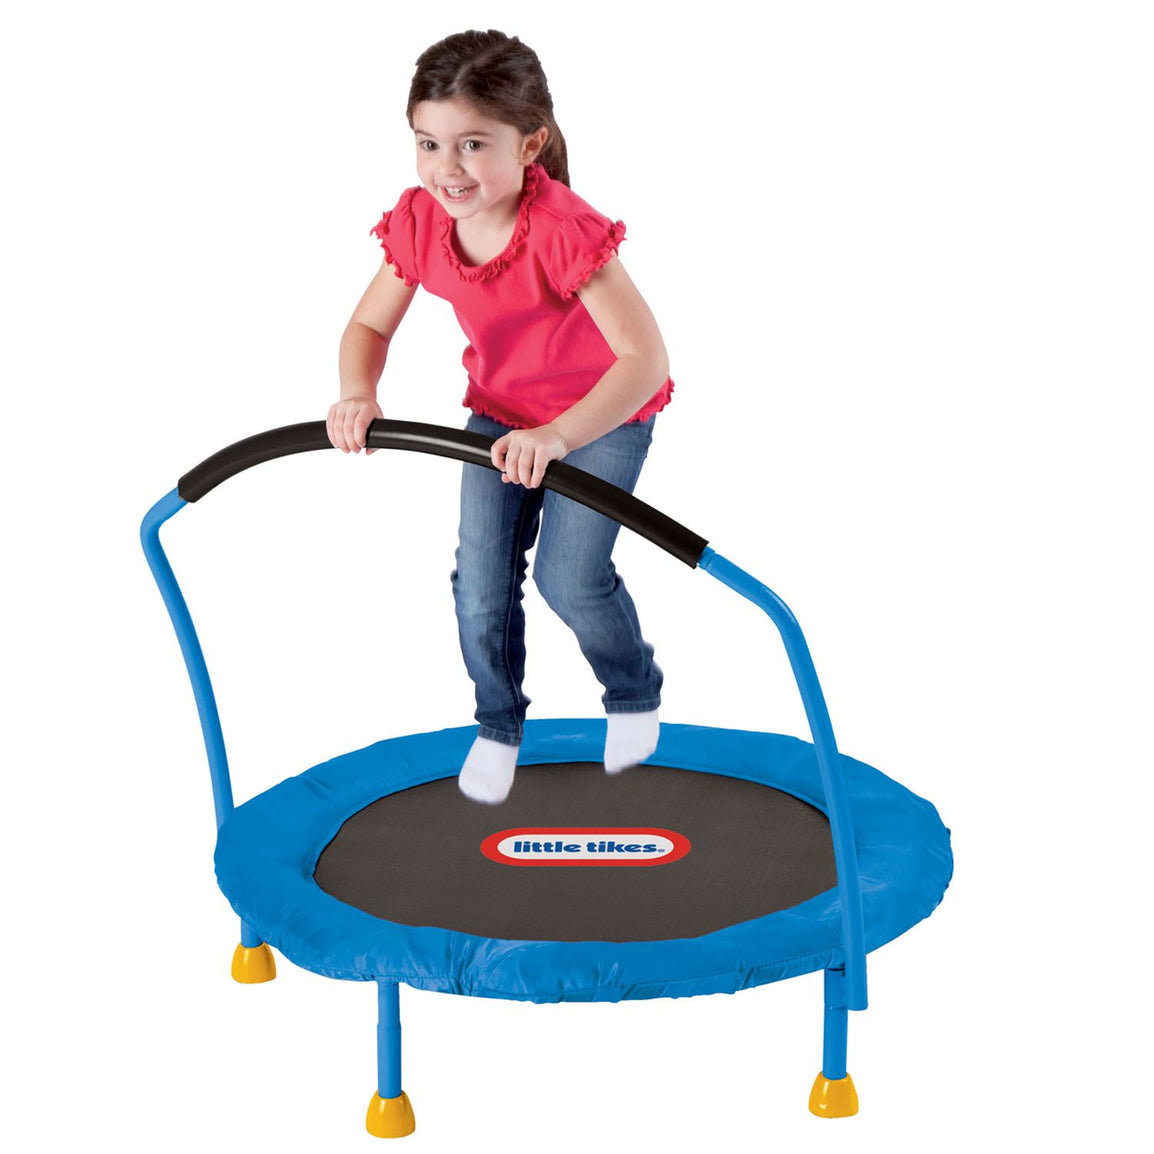 Great energy burner for kids who love to be active but can't go outside